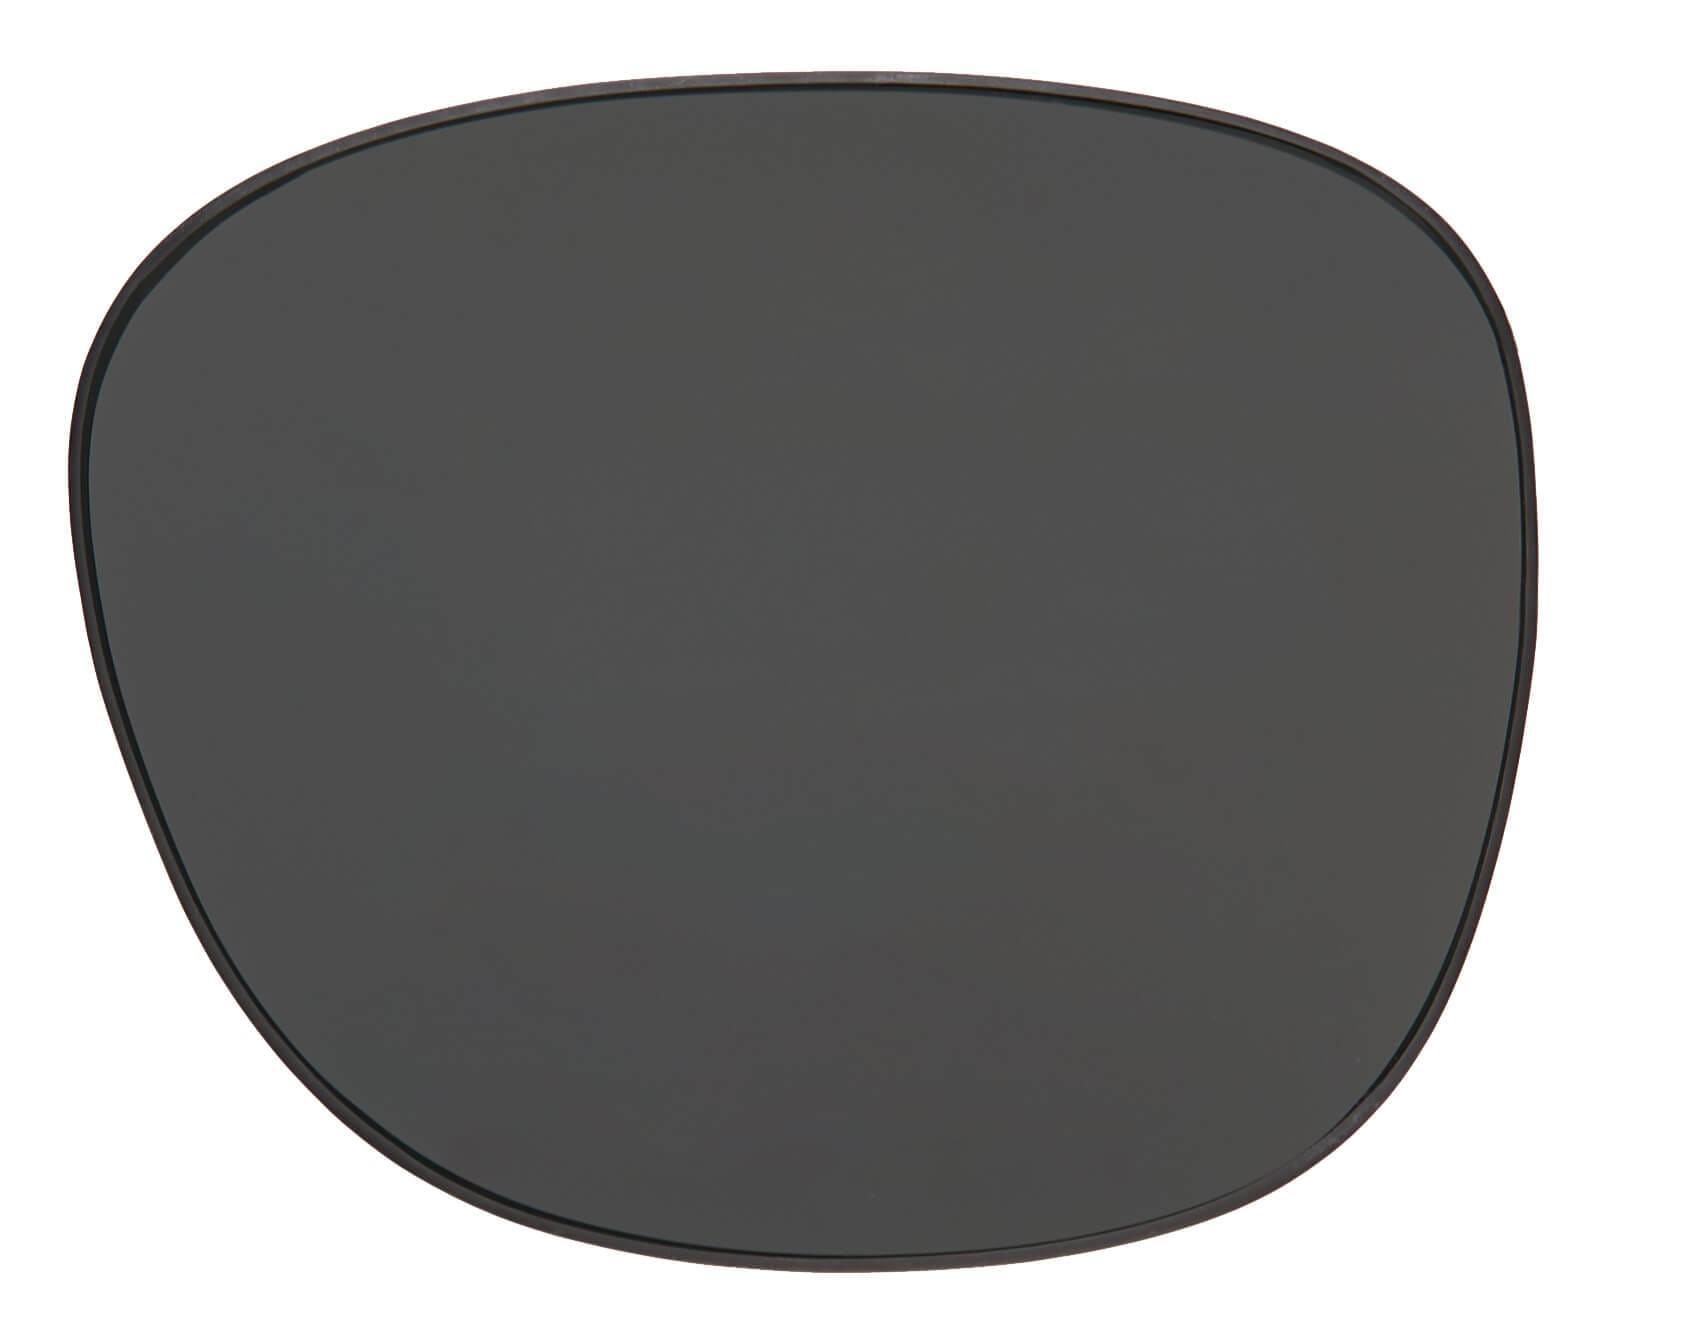 Custom clip-ons. Our polarized custom clip-ons reduce glare and are available for almost any frame. Each clip-on is specially cut to fit the frame with prices starting at just $3.95  (Compare to $50). Zenni square glasses #2020123 in clear, shown with gray polarized custom clip-on.